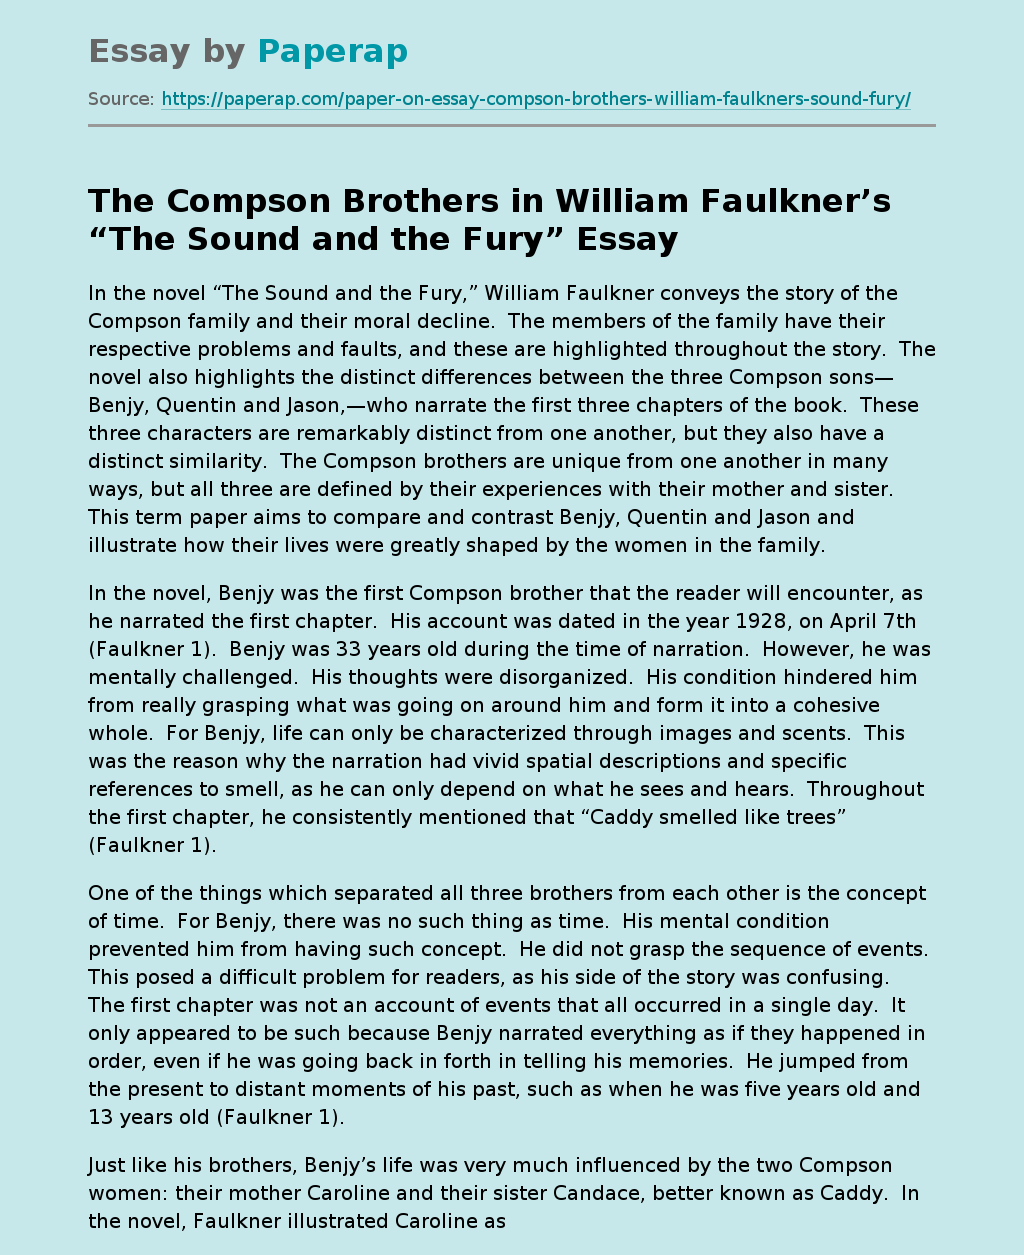 The Compson Brothers in William Faulkner’s “The Sound and the Fury”